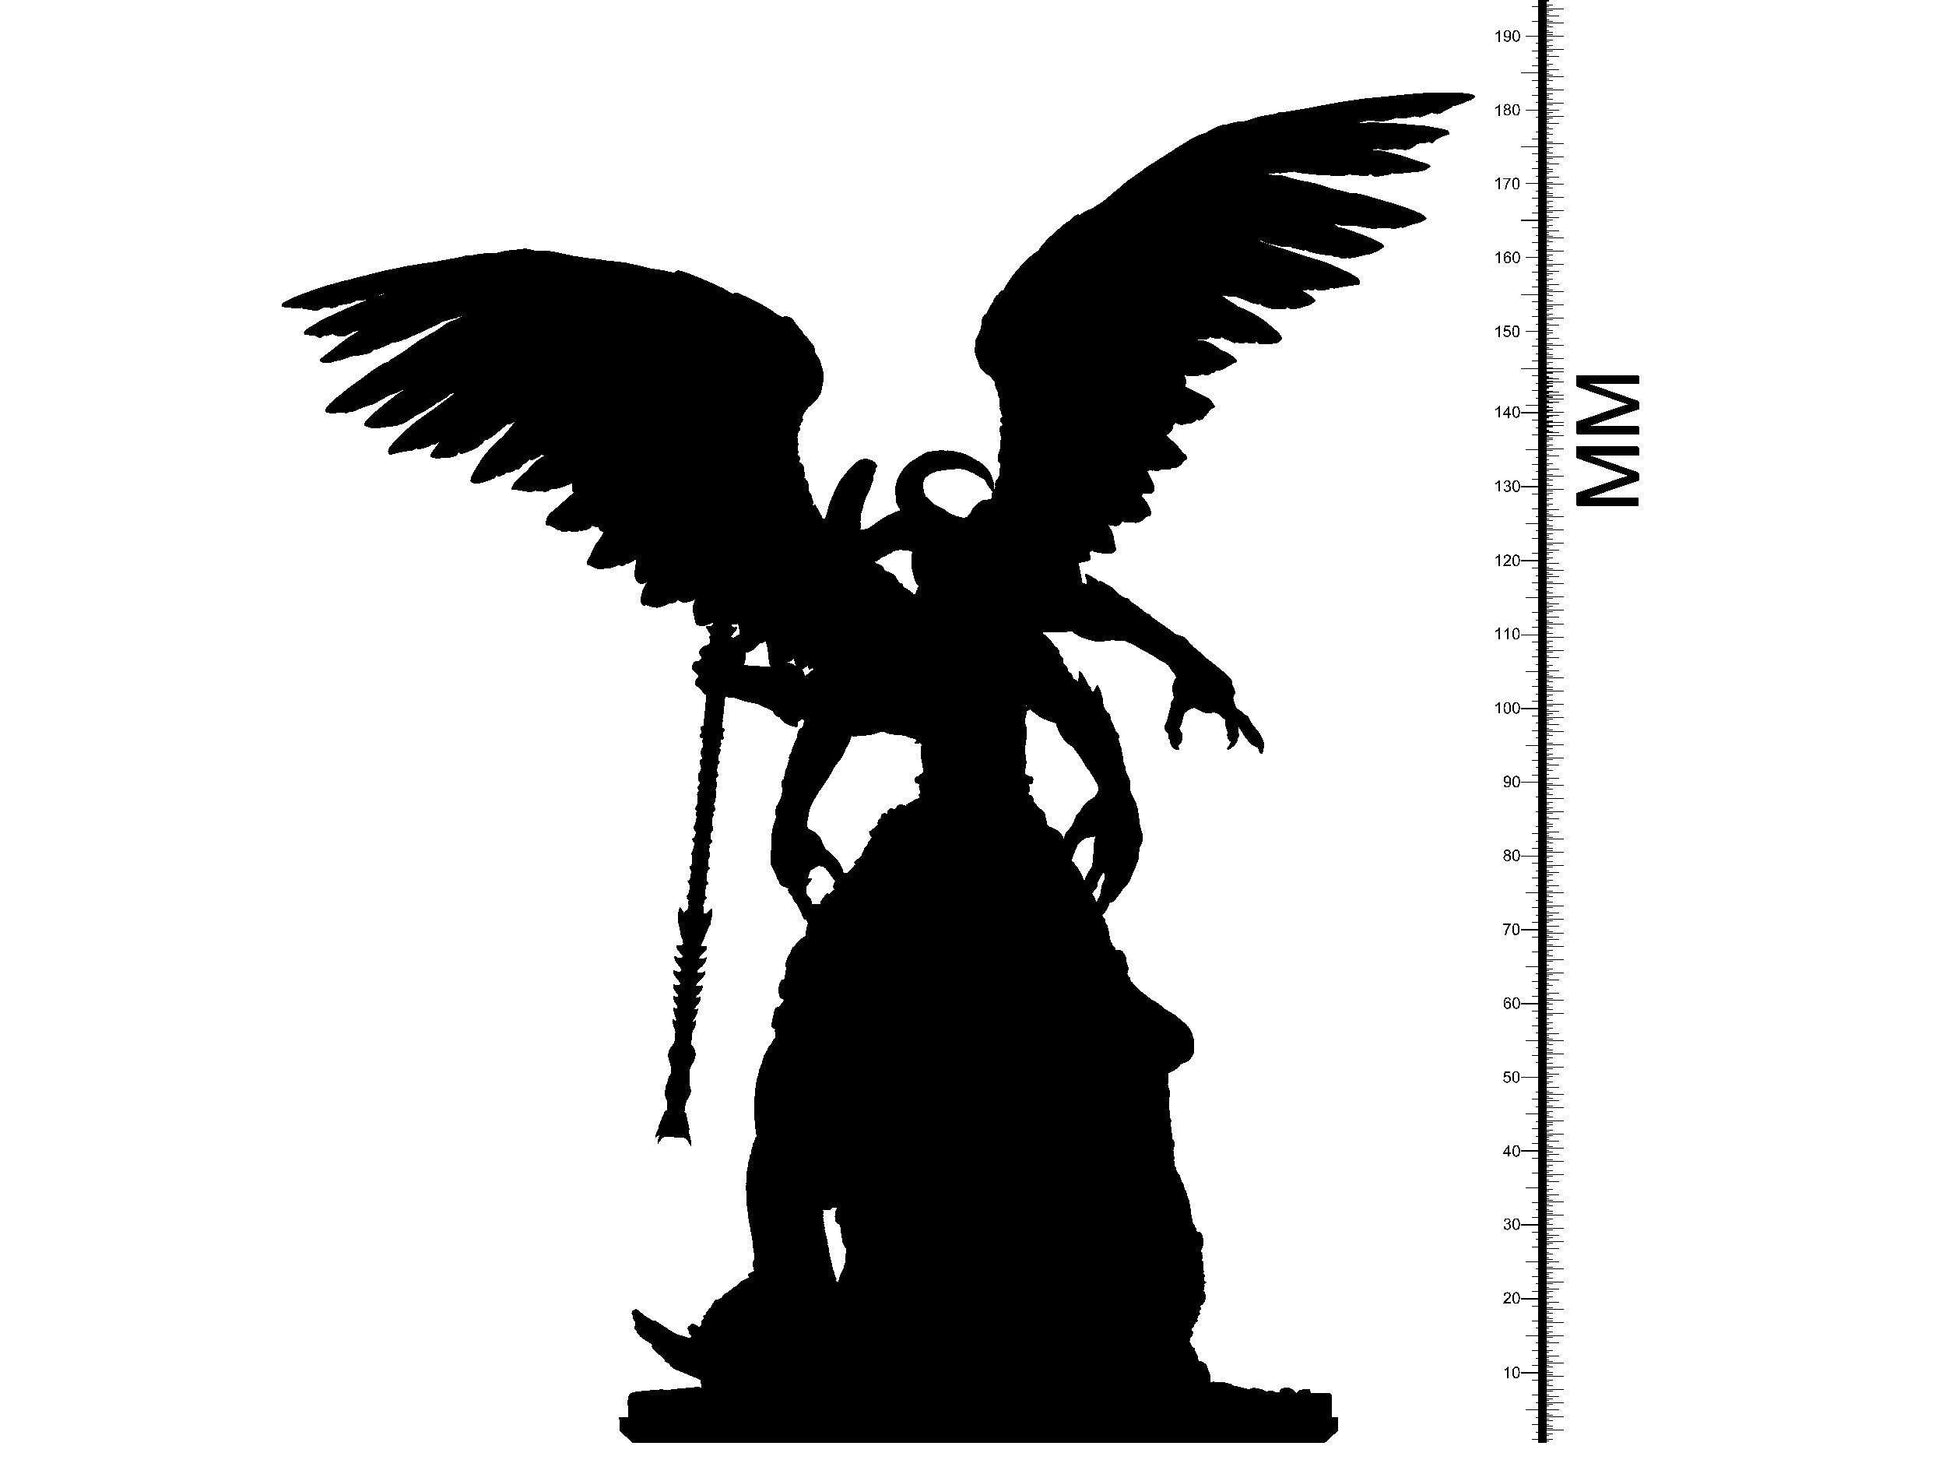 Pazuzu Miniature | Clay Cyanide | Wrath of God | Huge | Display | Tabletop Gaming | DnD Miniature | Dungeons and Dragons,DnD 5e - Plague Miniatures shop for DnD Miniatures